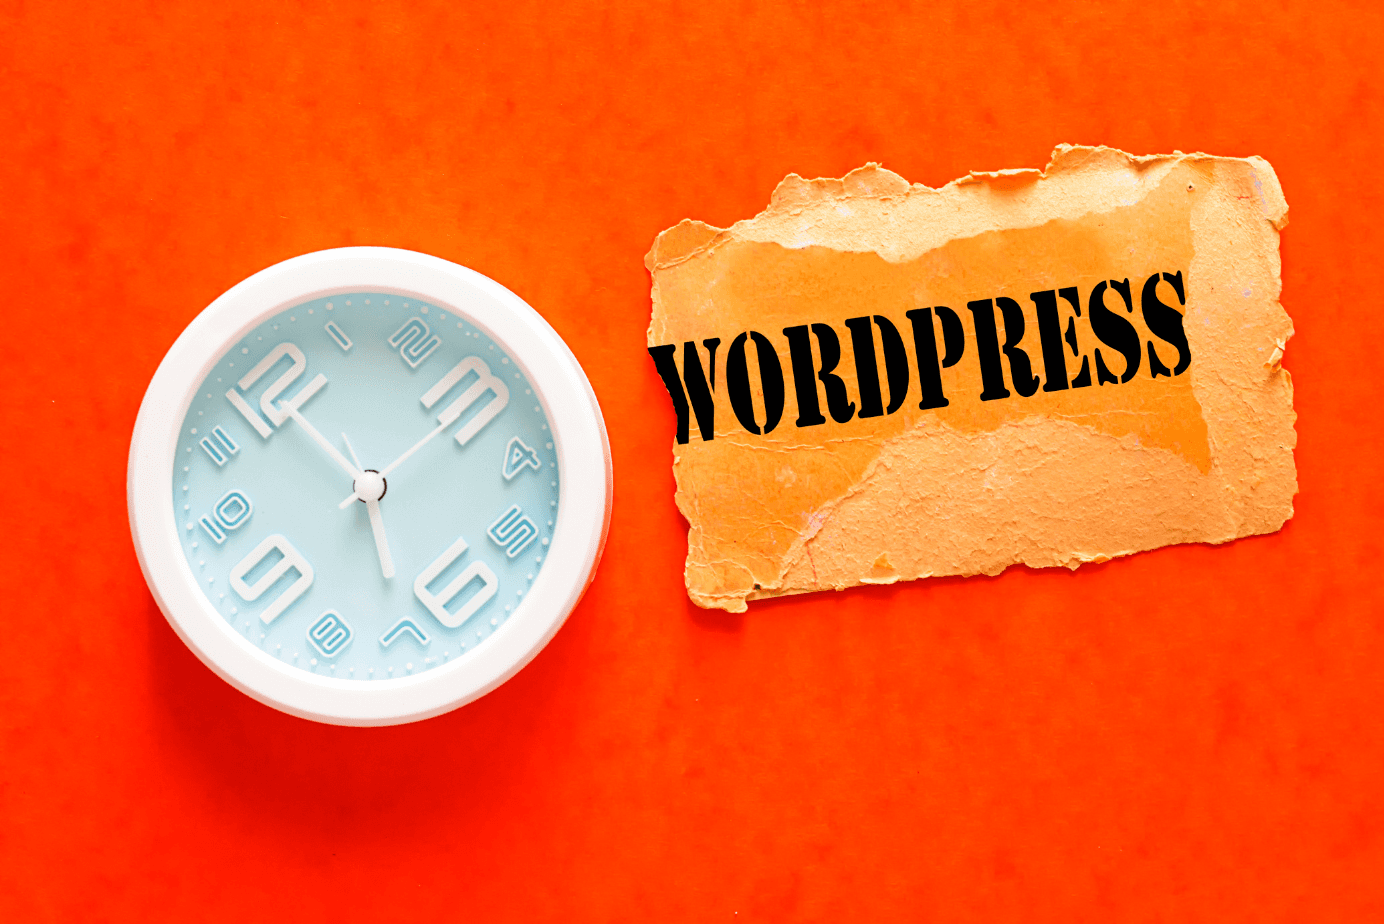 WordPress Pages VS Posts, Do They Rank Better?